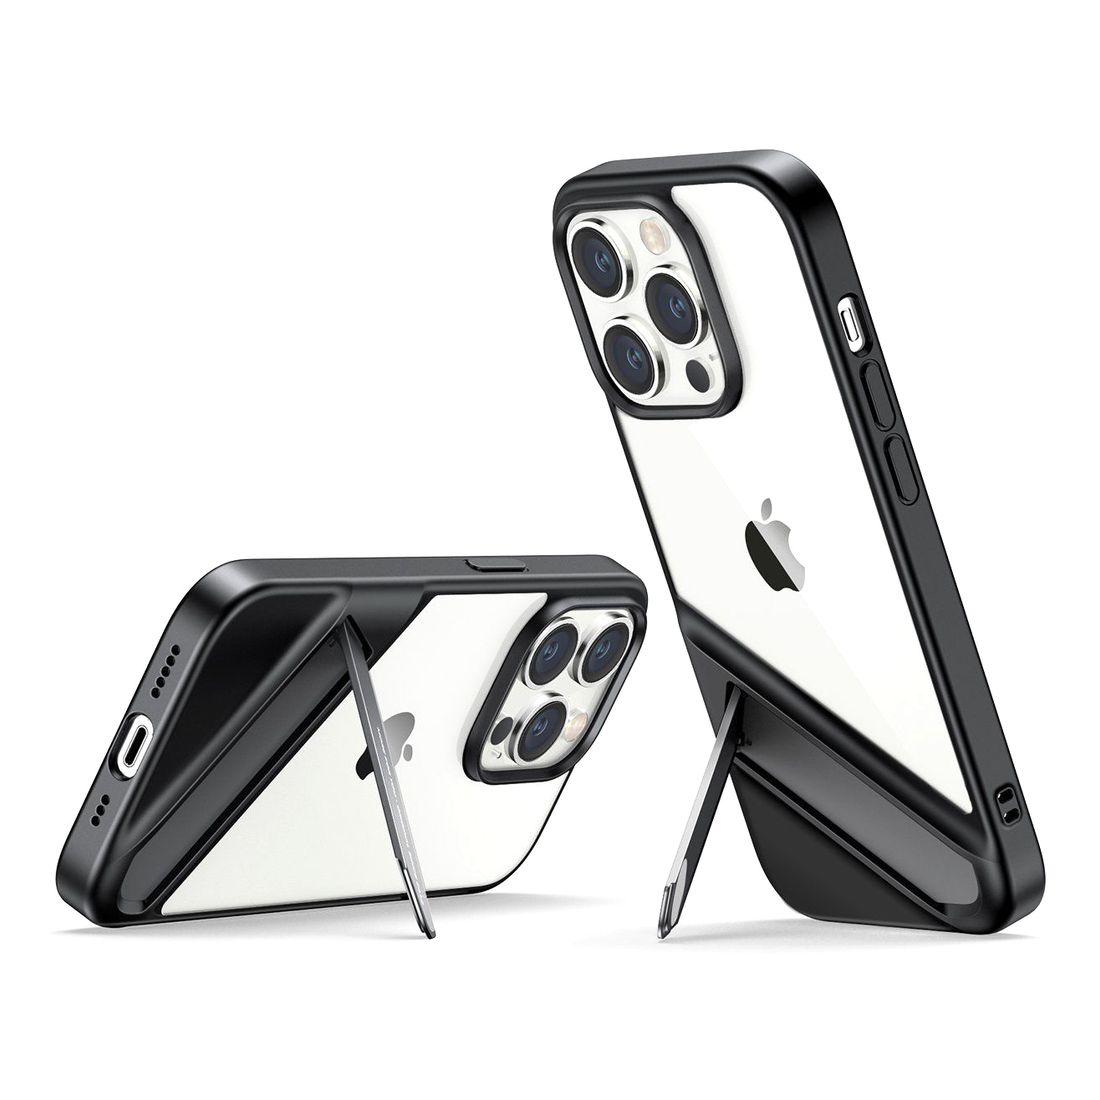 UGreen Kickstand Protective Case for iPhone 14 Pro Max - Black